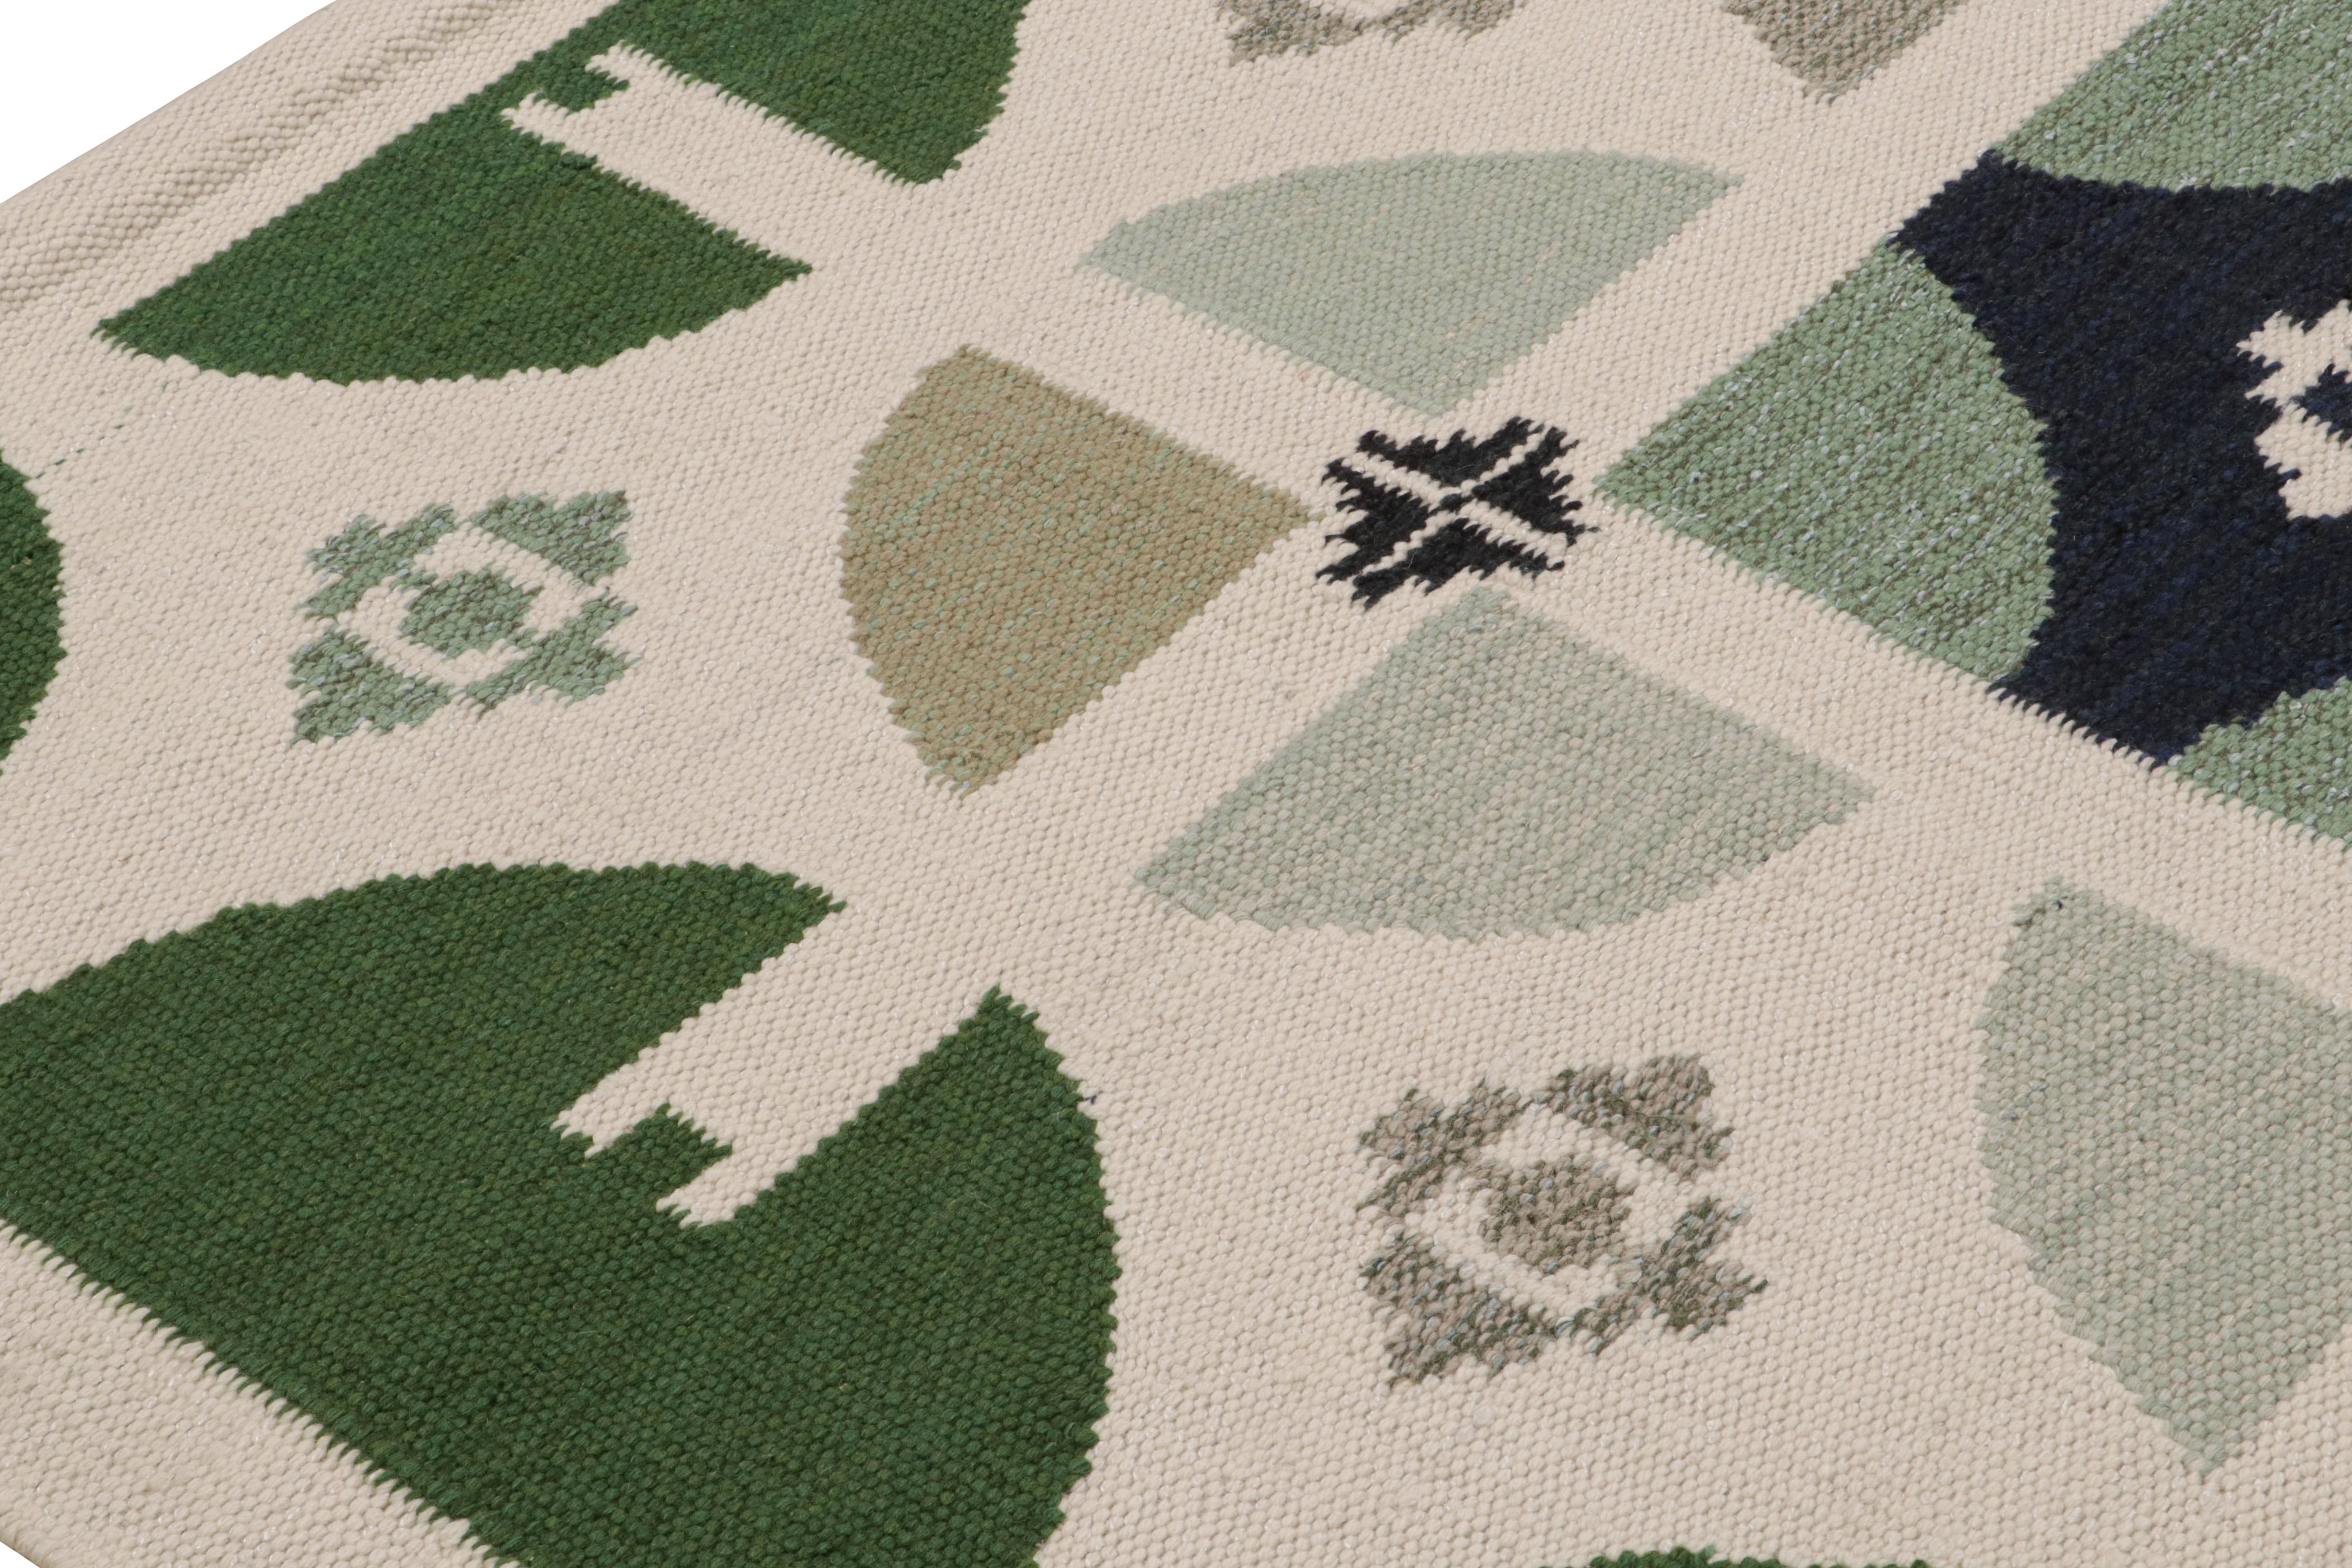 Hand-Woven Rug & Kilim’s Scandinavian Style Kilim Rug in Green, White & Black Patterns For Sale